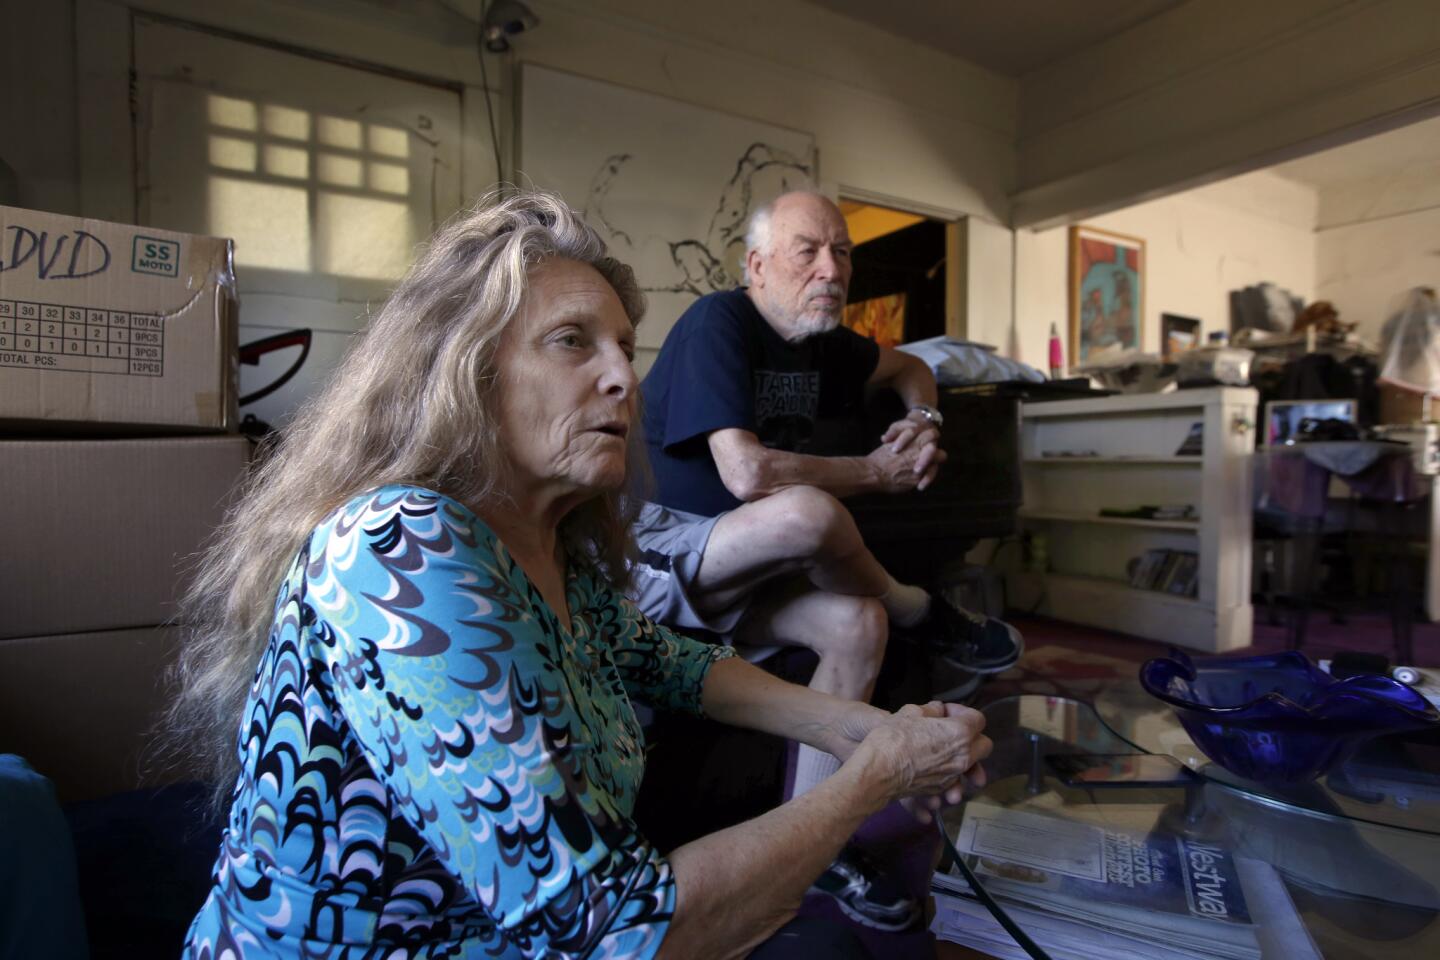 Tina Preston, 76, and husband Don Preston, 85, live in a rented home in Highland Park. Don, a renowned electronic and jazz pianist, was one of the original members of Frank Zappa’s Mothers of Invention; Tina is an actress. The couple face the difficult task of finding affordable housing on a fixed income as elder artists.